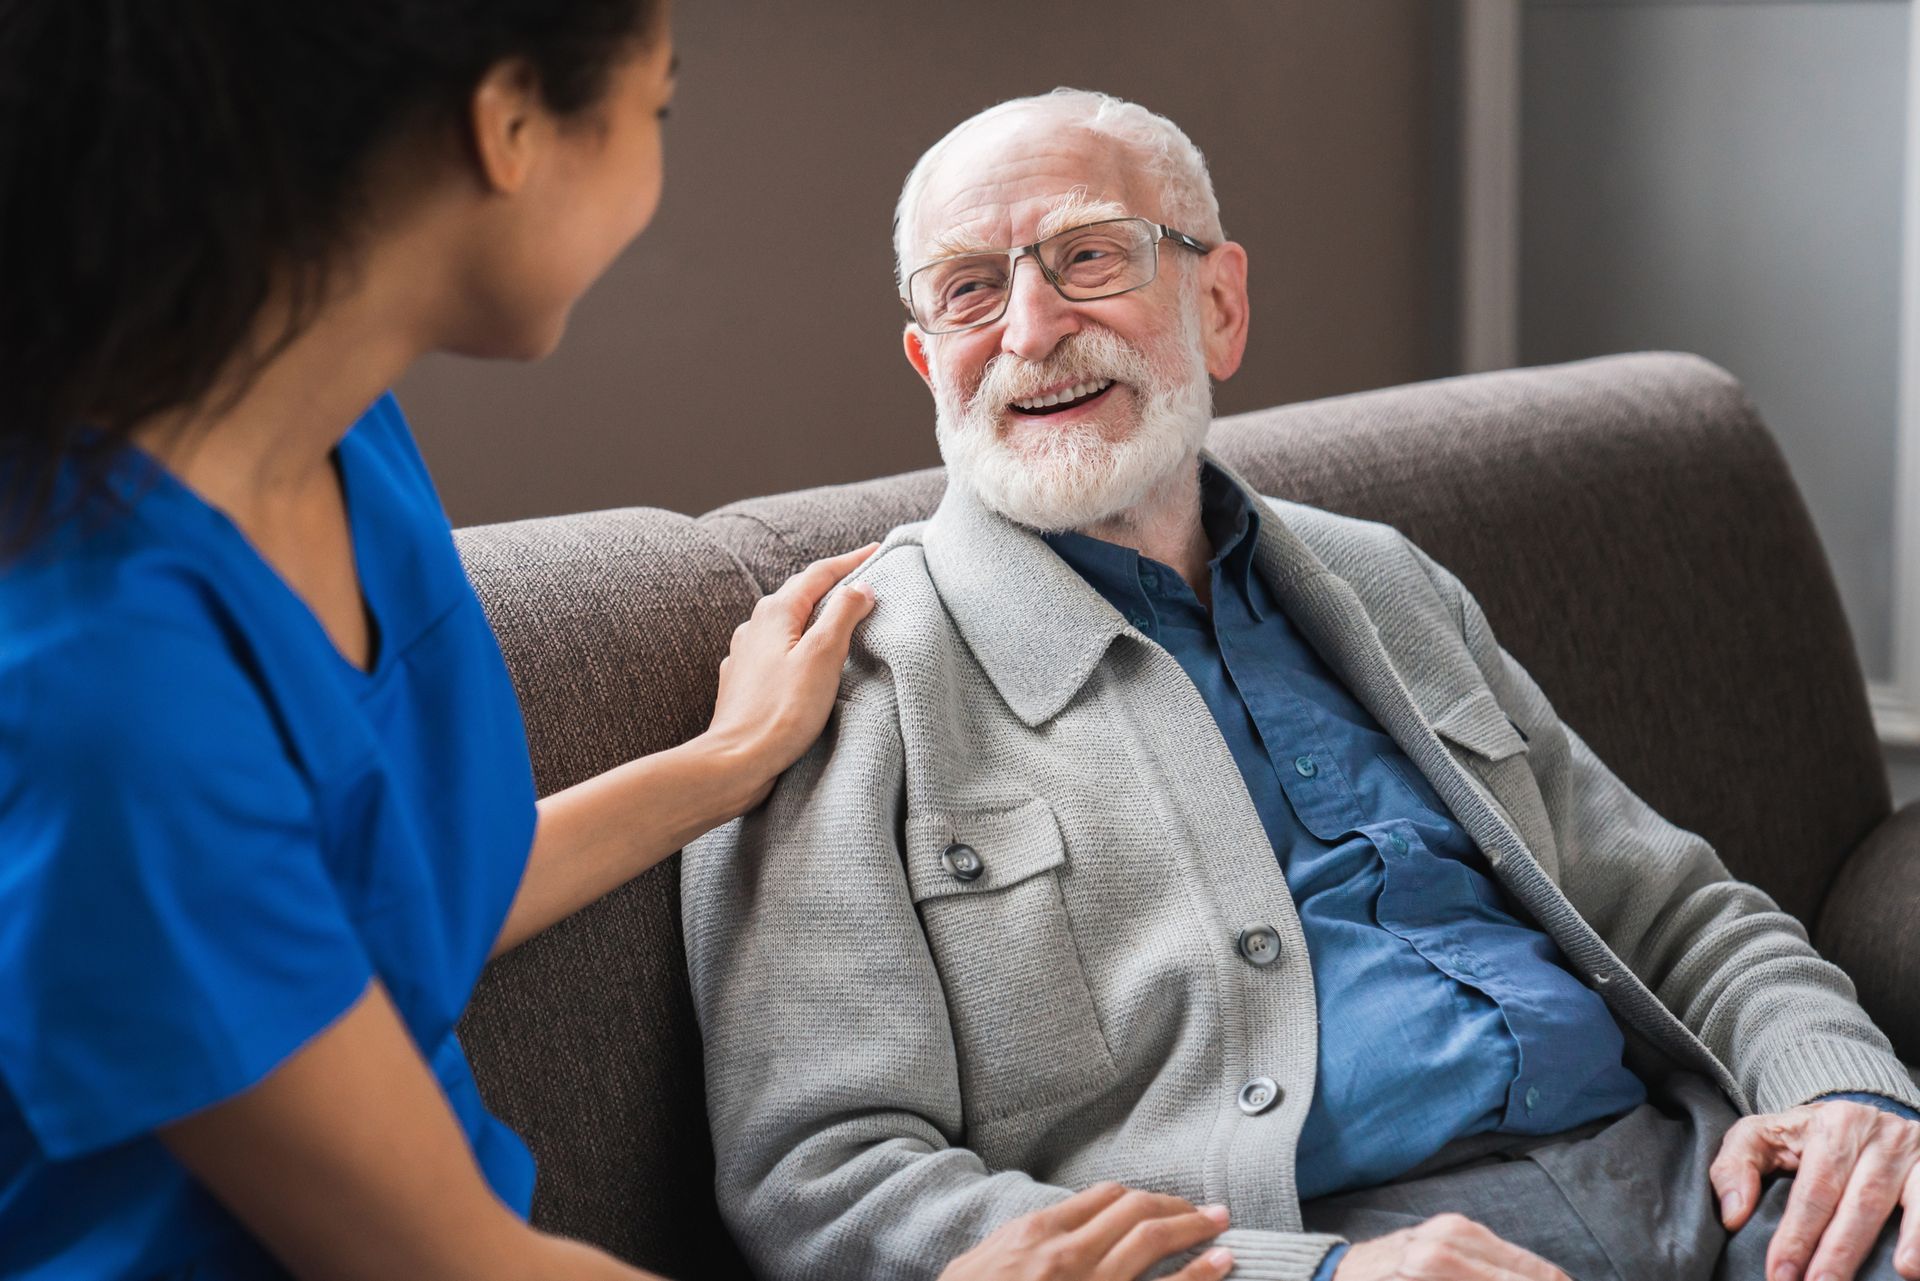 An elderly man is sitting on a couch with a nurse